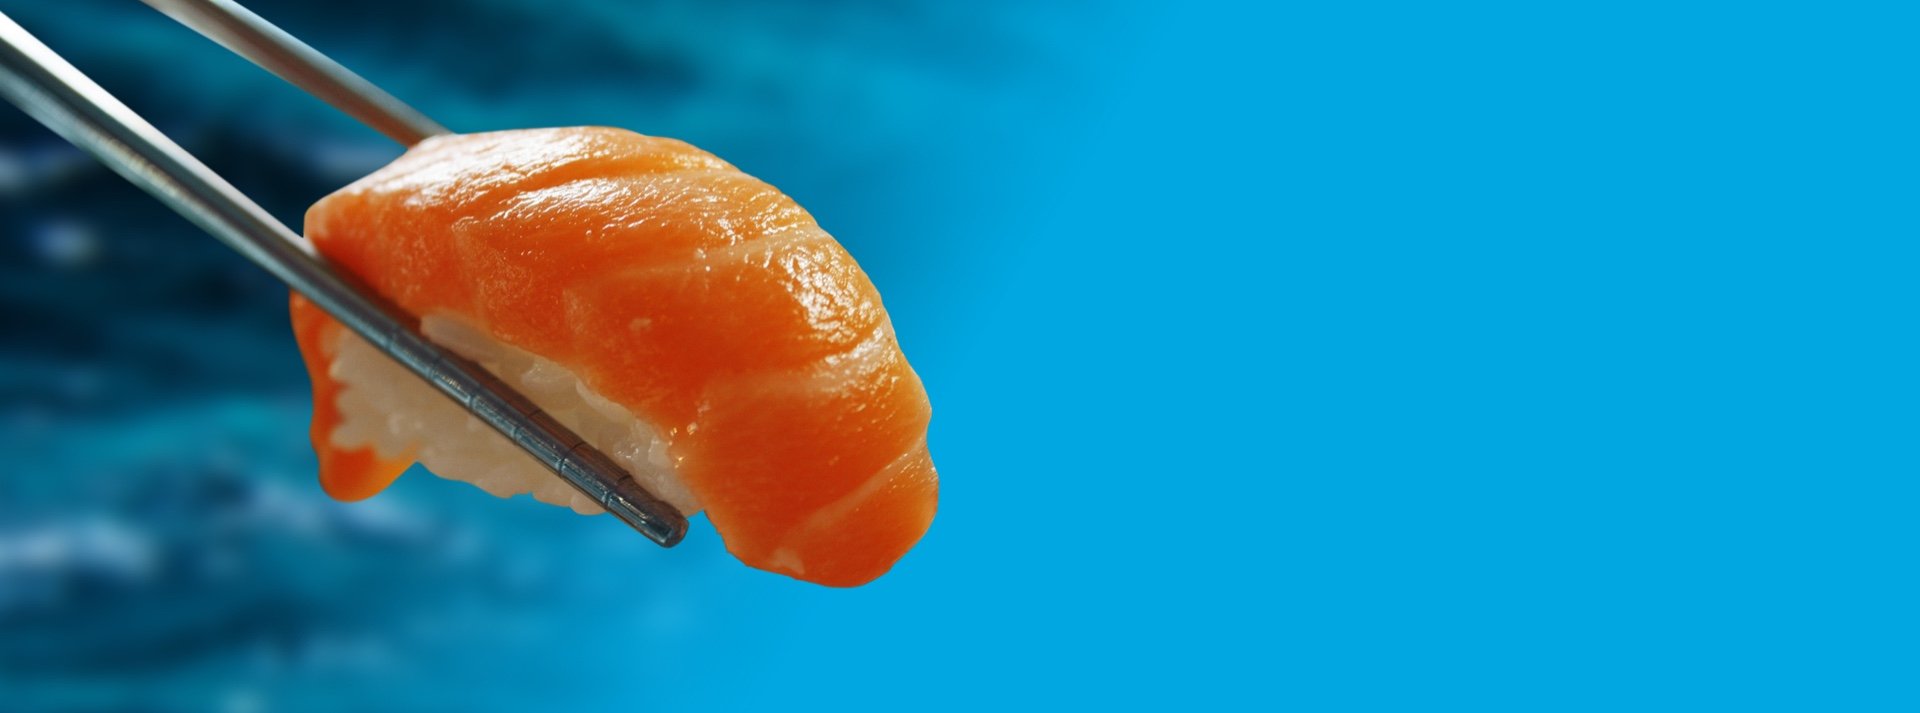 Salmon sushi being held by chopsticks